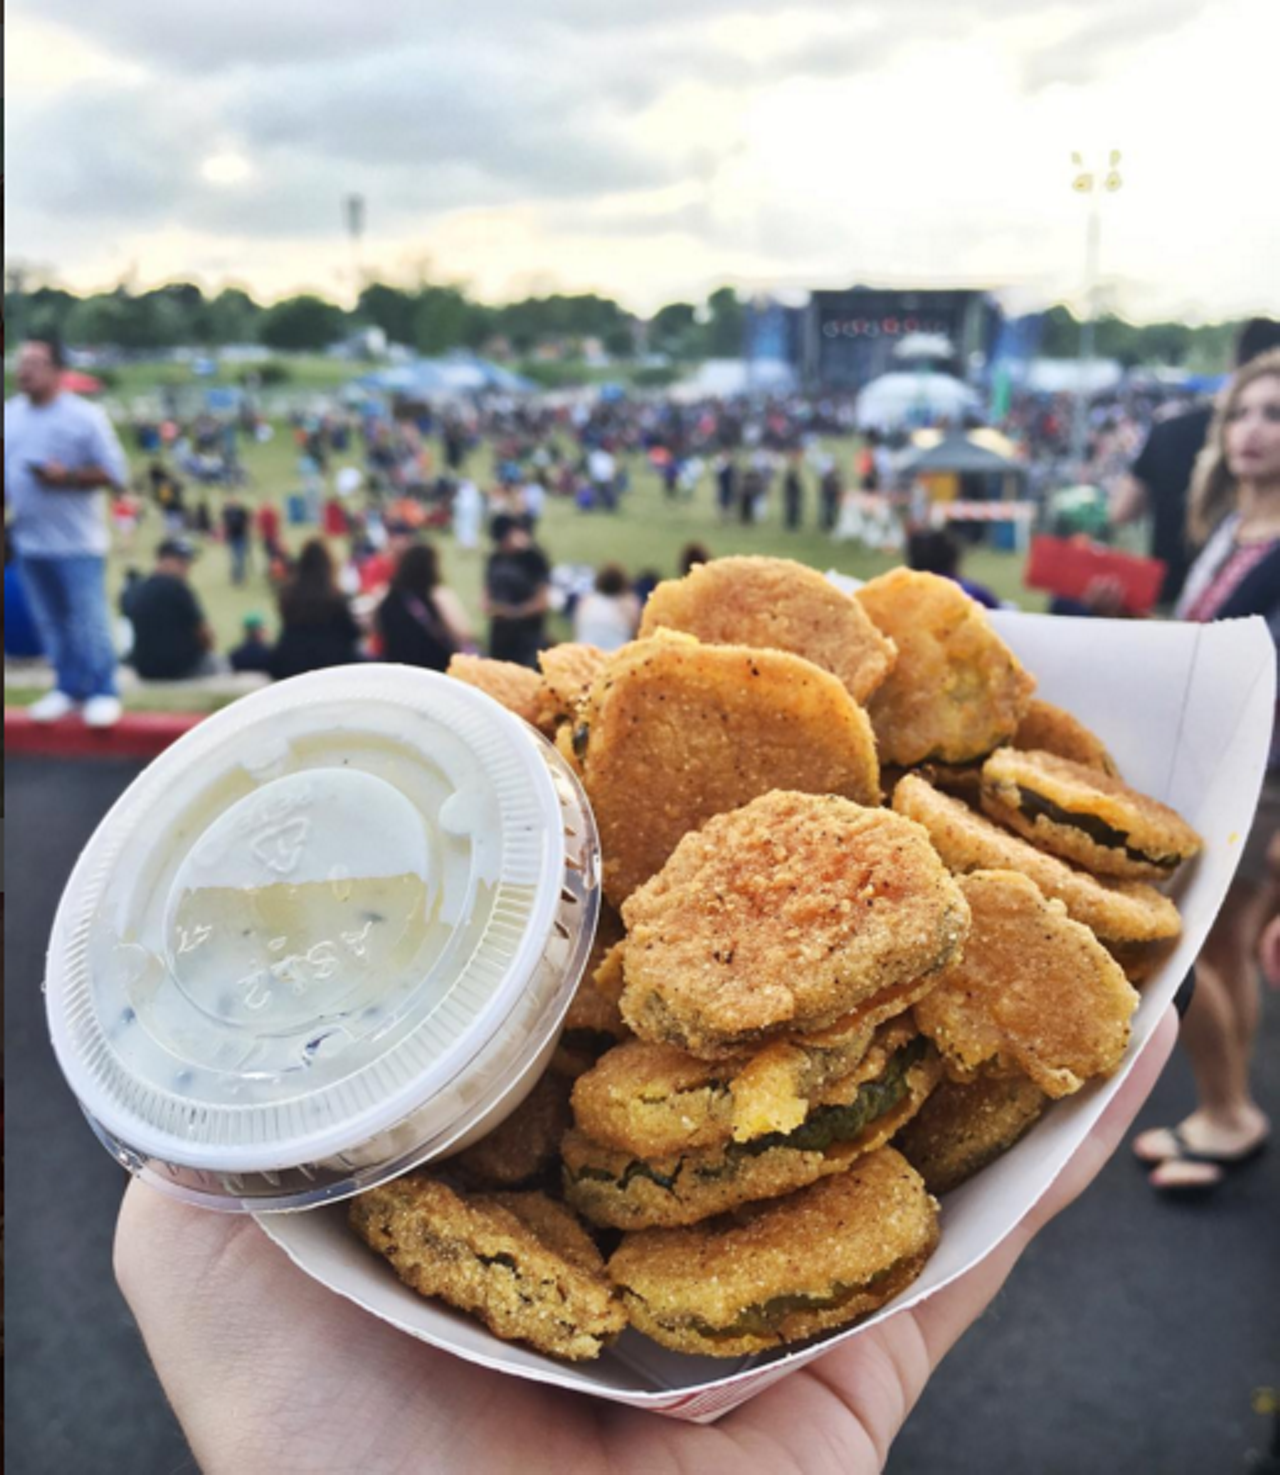 Trust us, you need these fried pickles in your life. Like, right now.
Photo via Instagram/eat_it_b